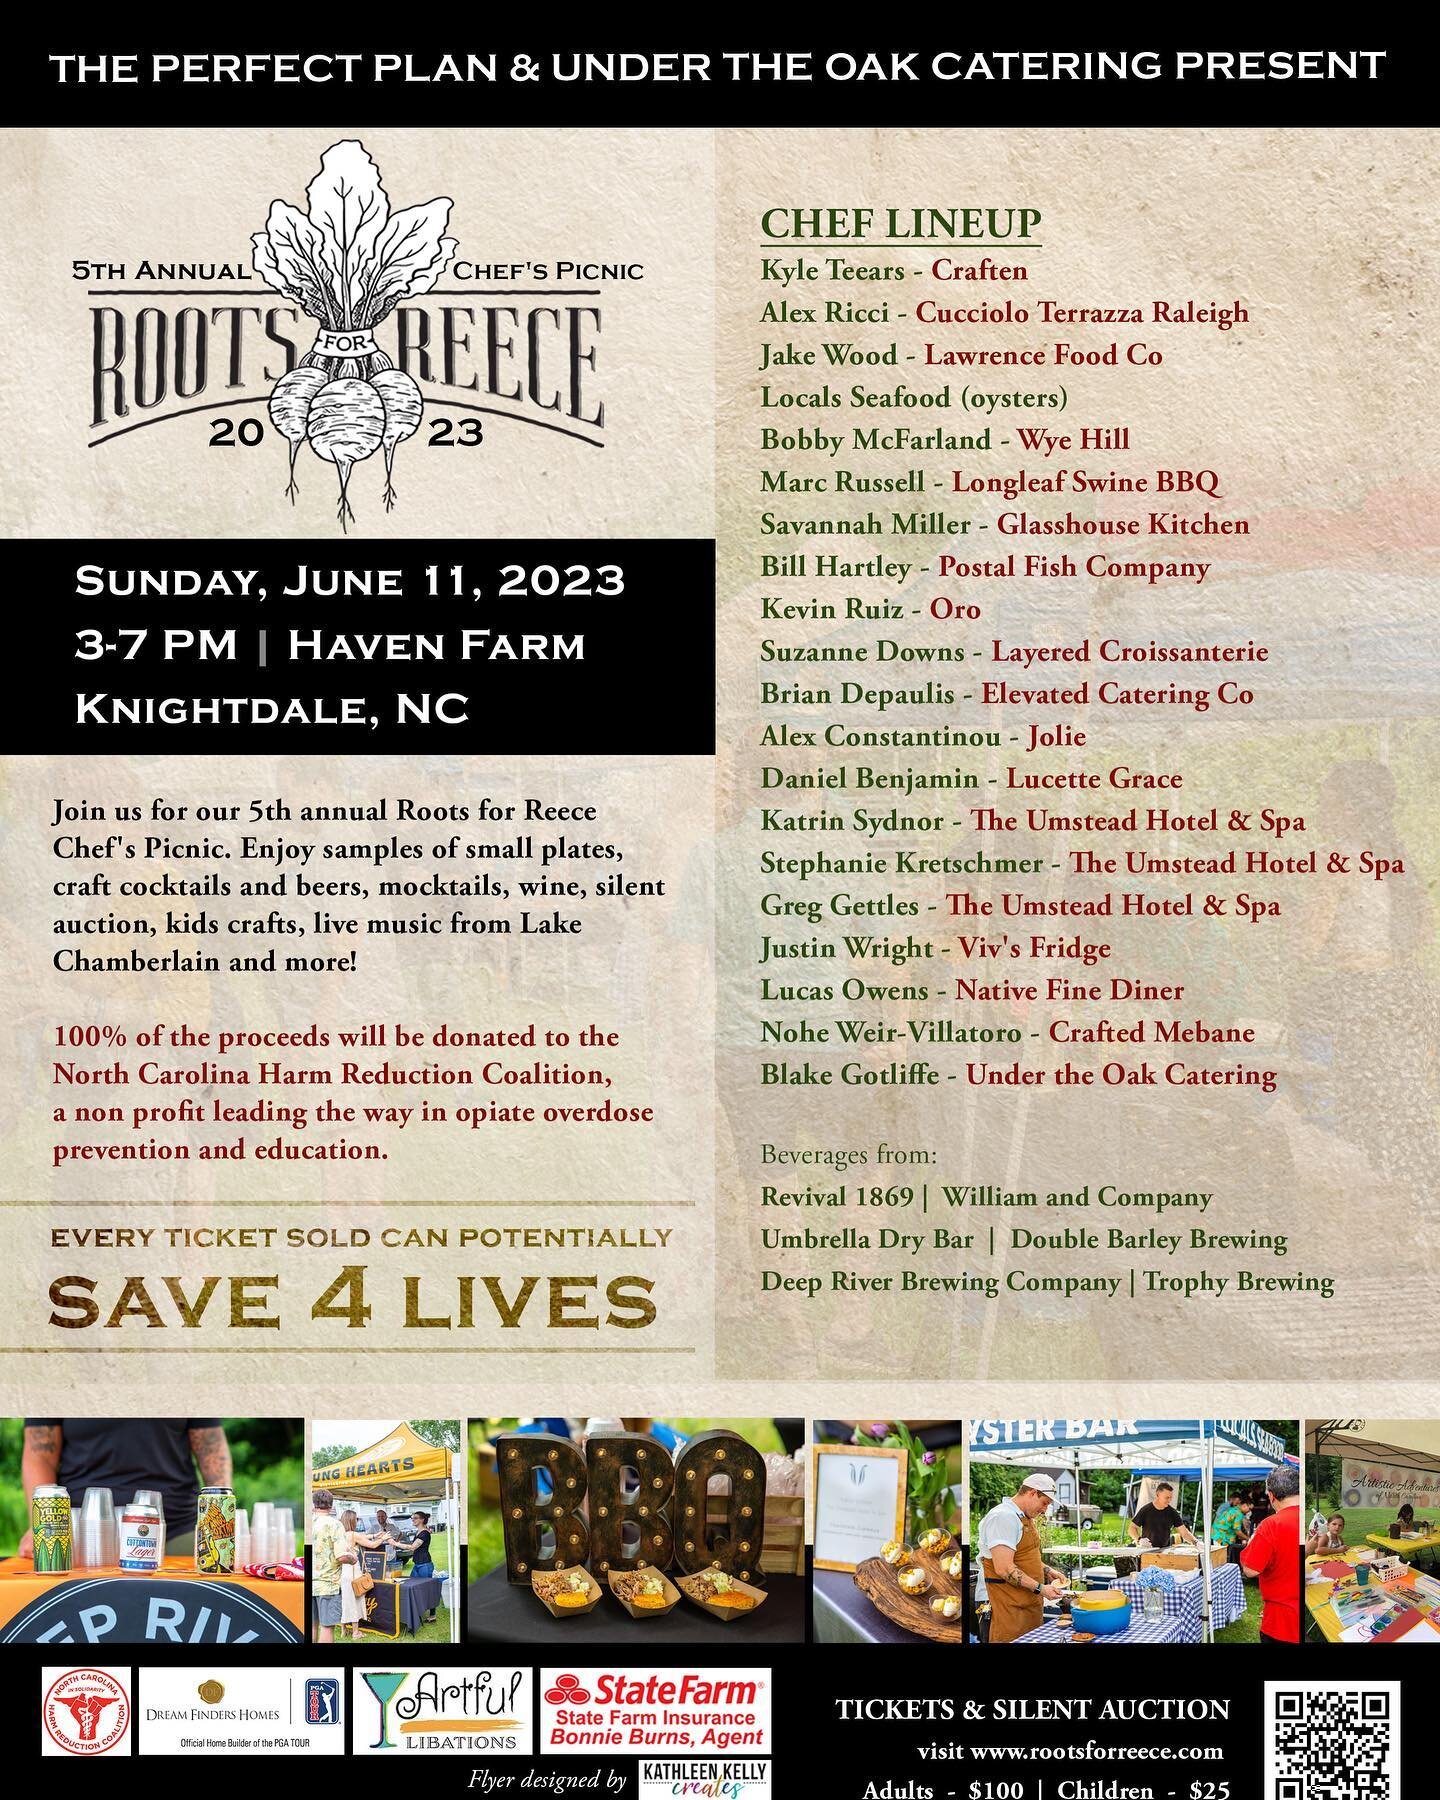 Join us for the 5th annual @rootsforreece, Chef's Picnic on June 11th hosted at Haven Farm in Knightdale! Feast on delicious food from over 25 local food and beverage vendors, enjoy live music, and support a great cause. Get your tickets now: www.roo